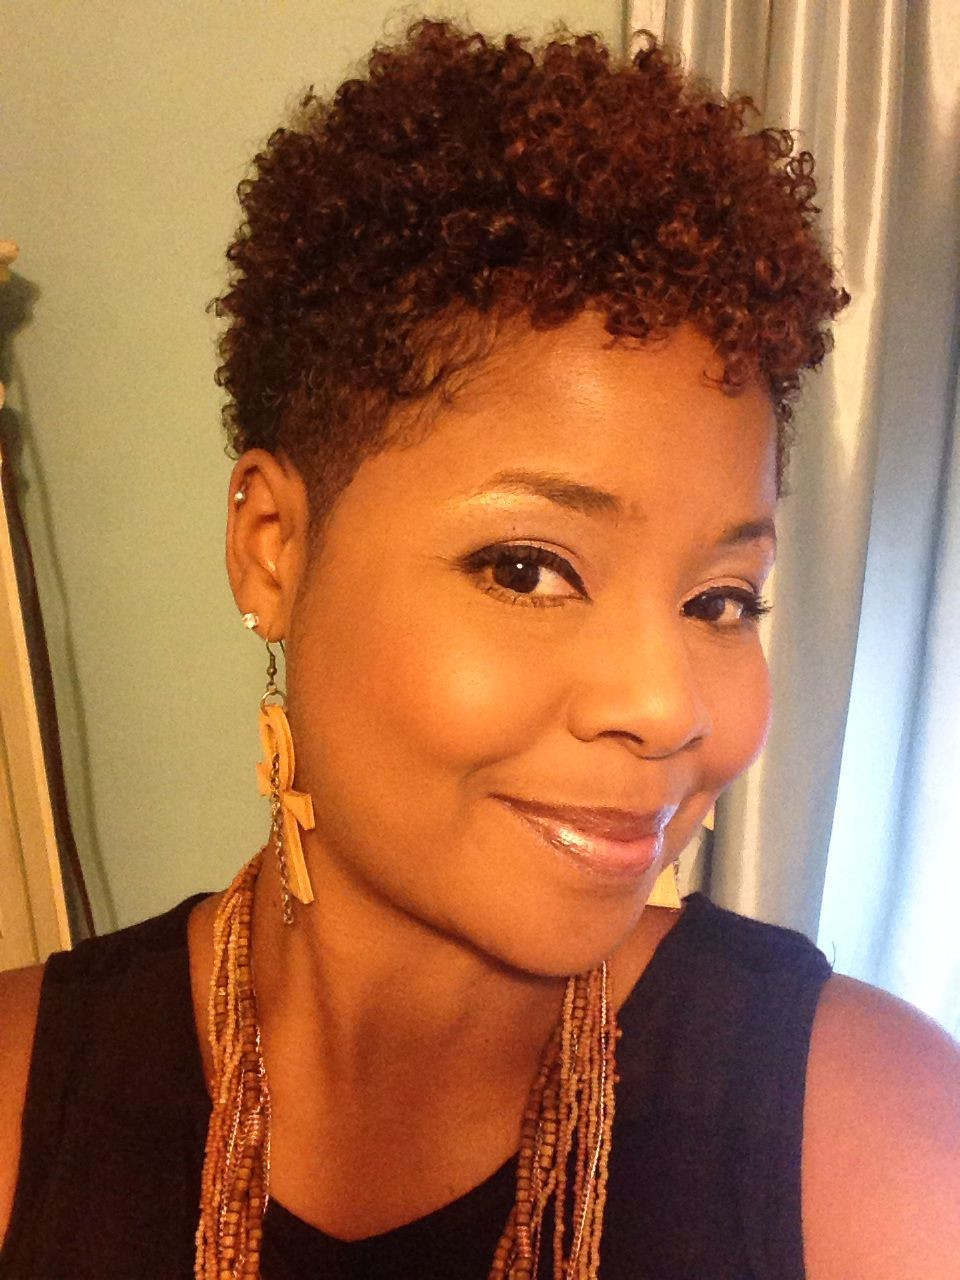 Short Tapered Haircuts For Natural Hair
 Freshly cut faux hawk Ankh earrings courtesy of